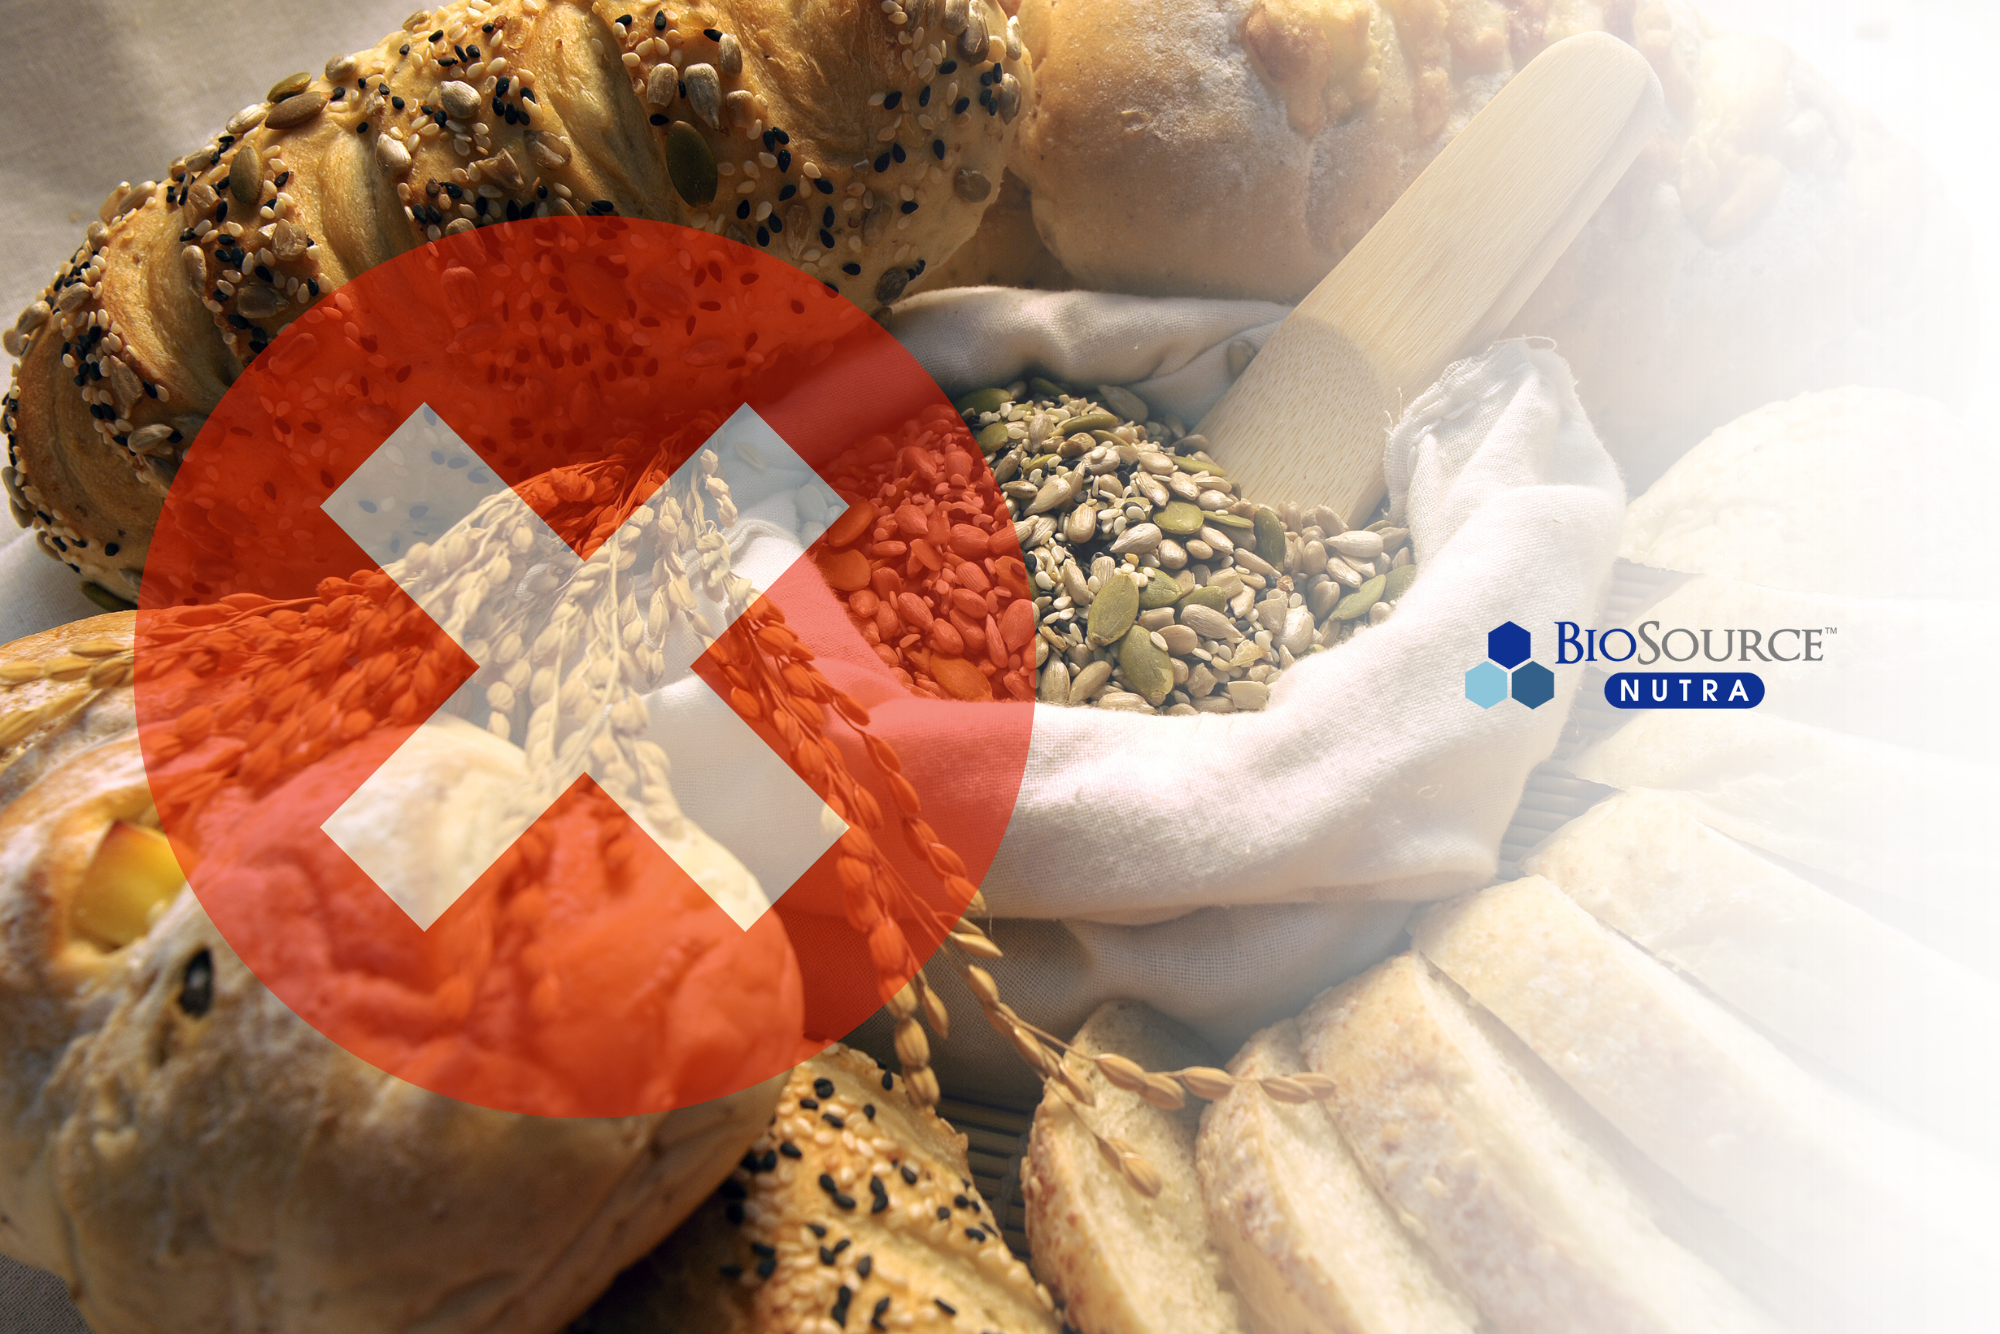 A variety of breads and grains with a red x over it